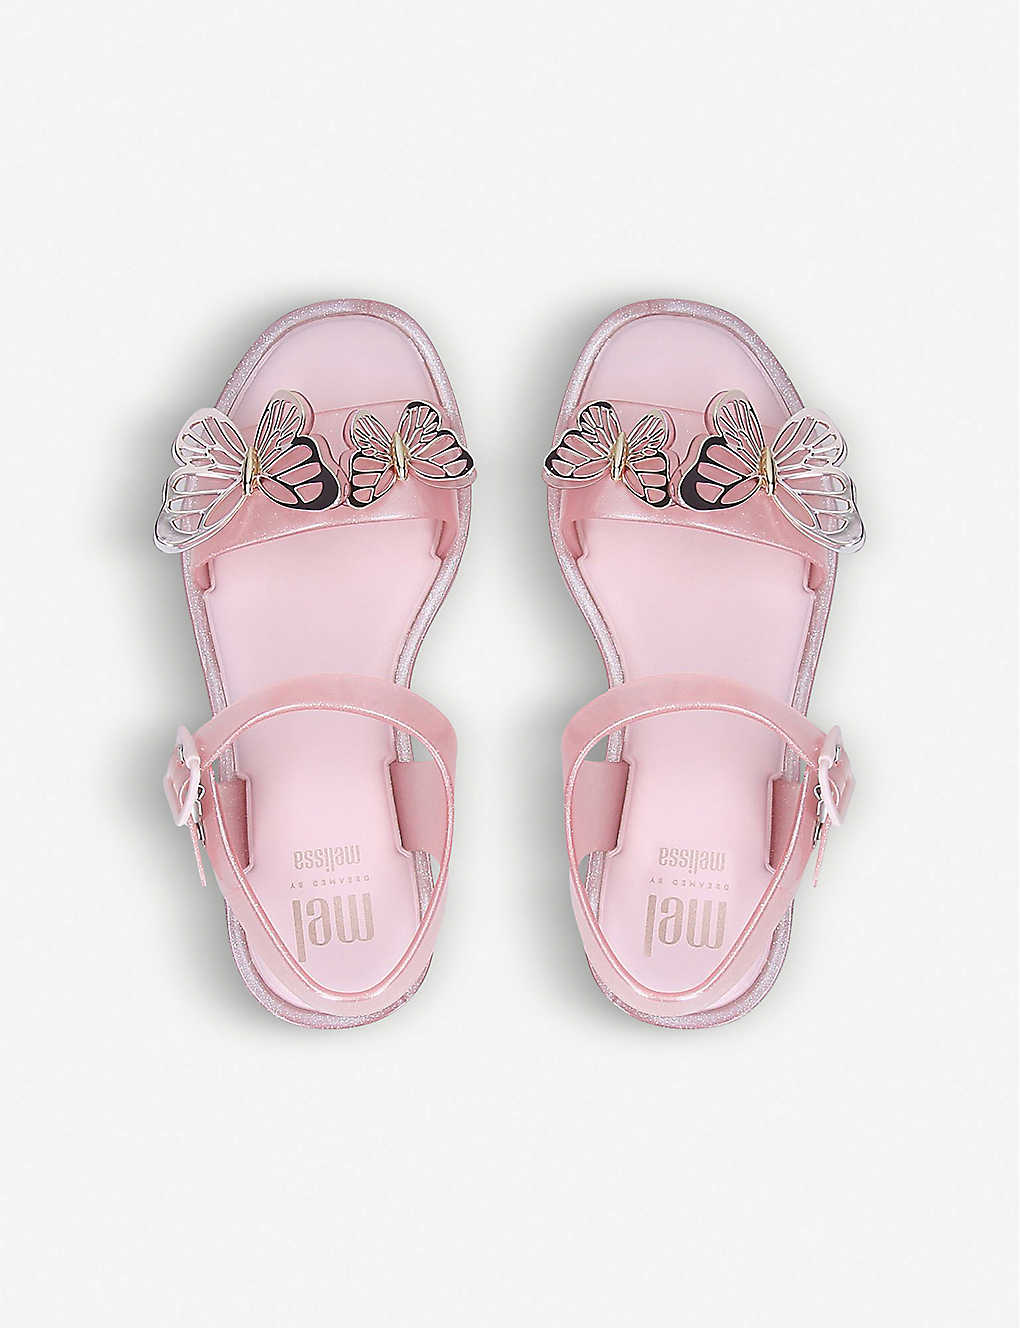 MINI MELISSA MAR FLY RUBBER SANDALS 7-9 YEARS